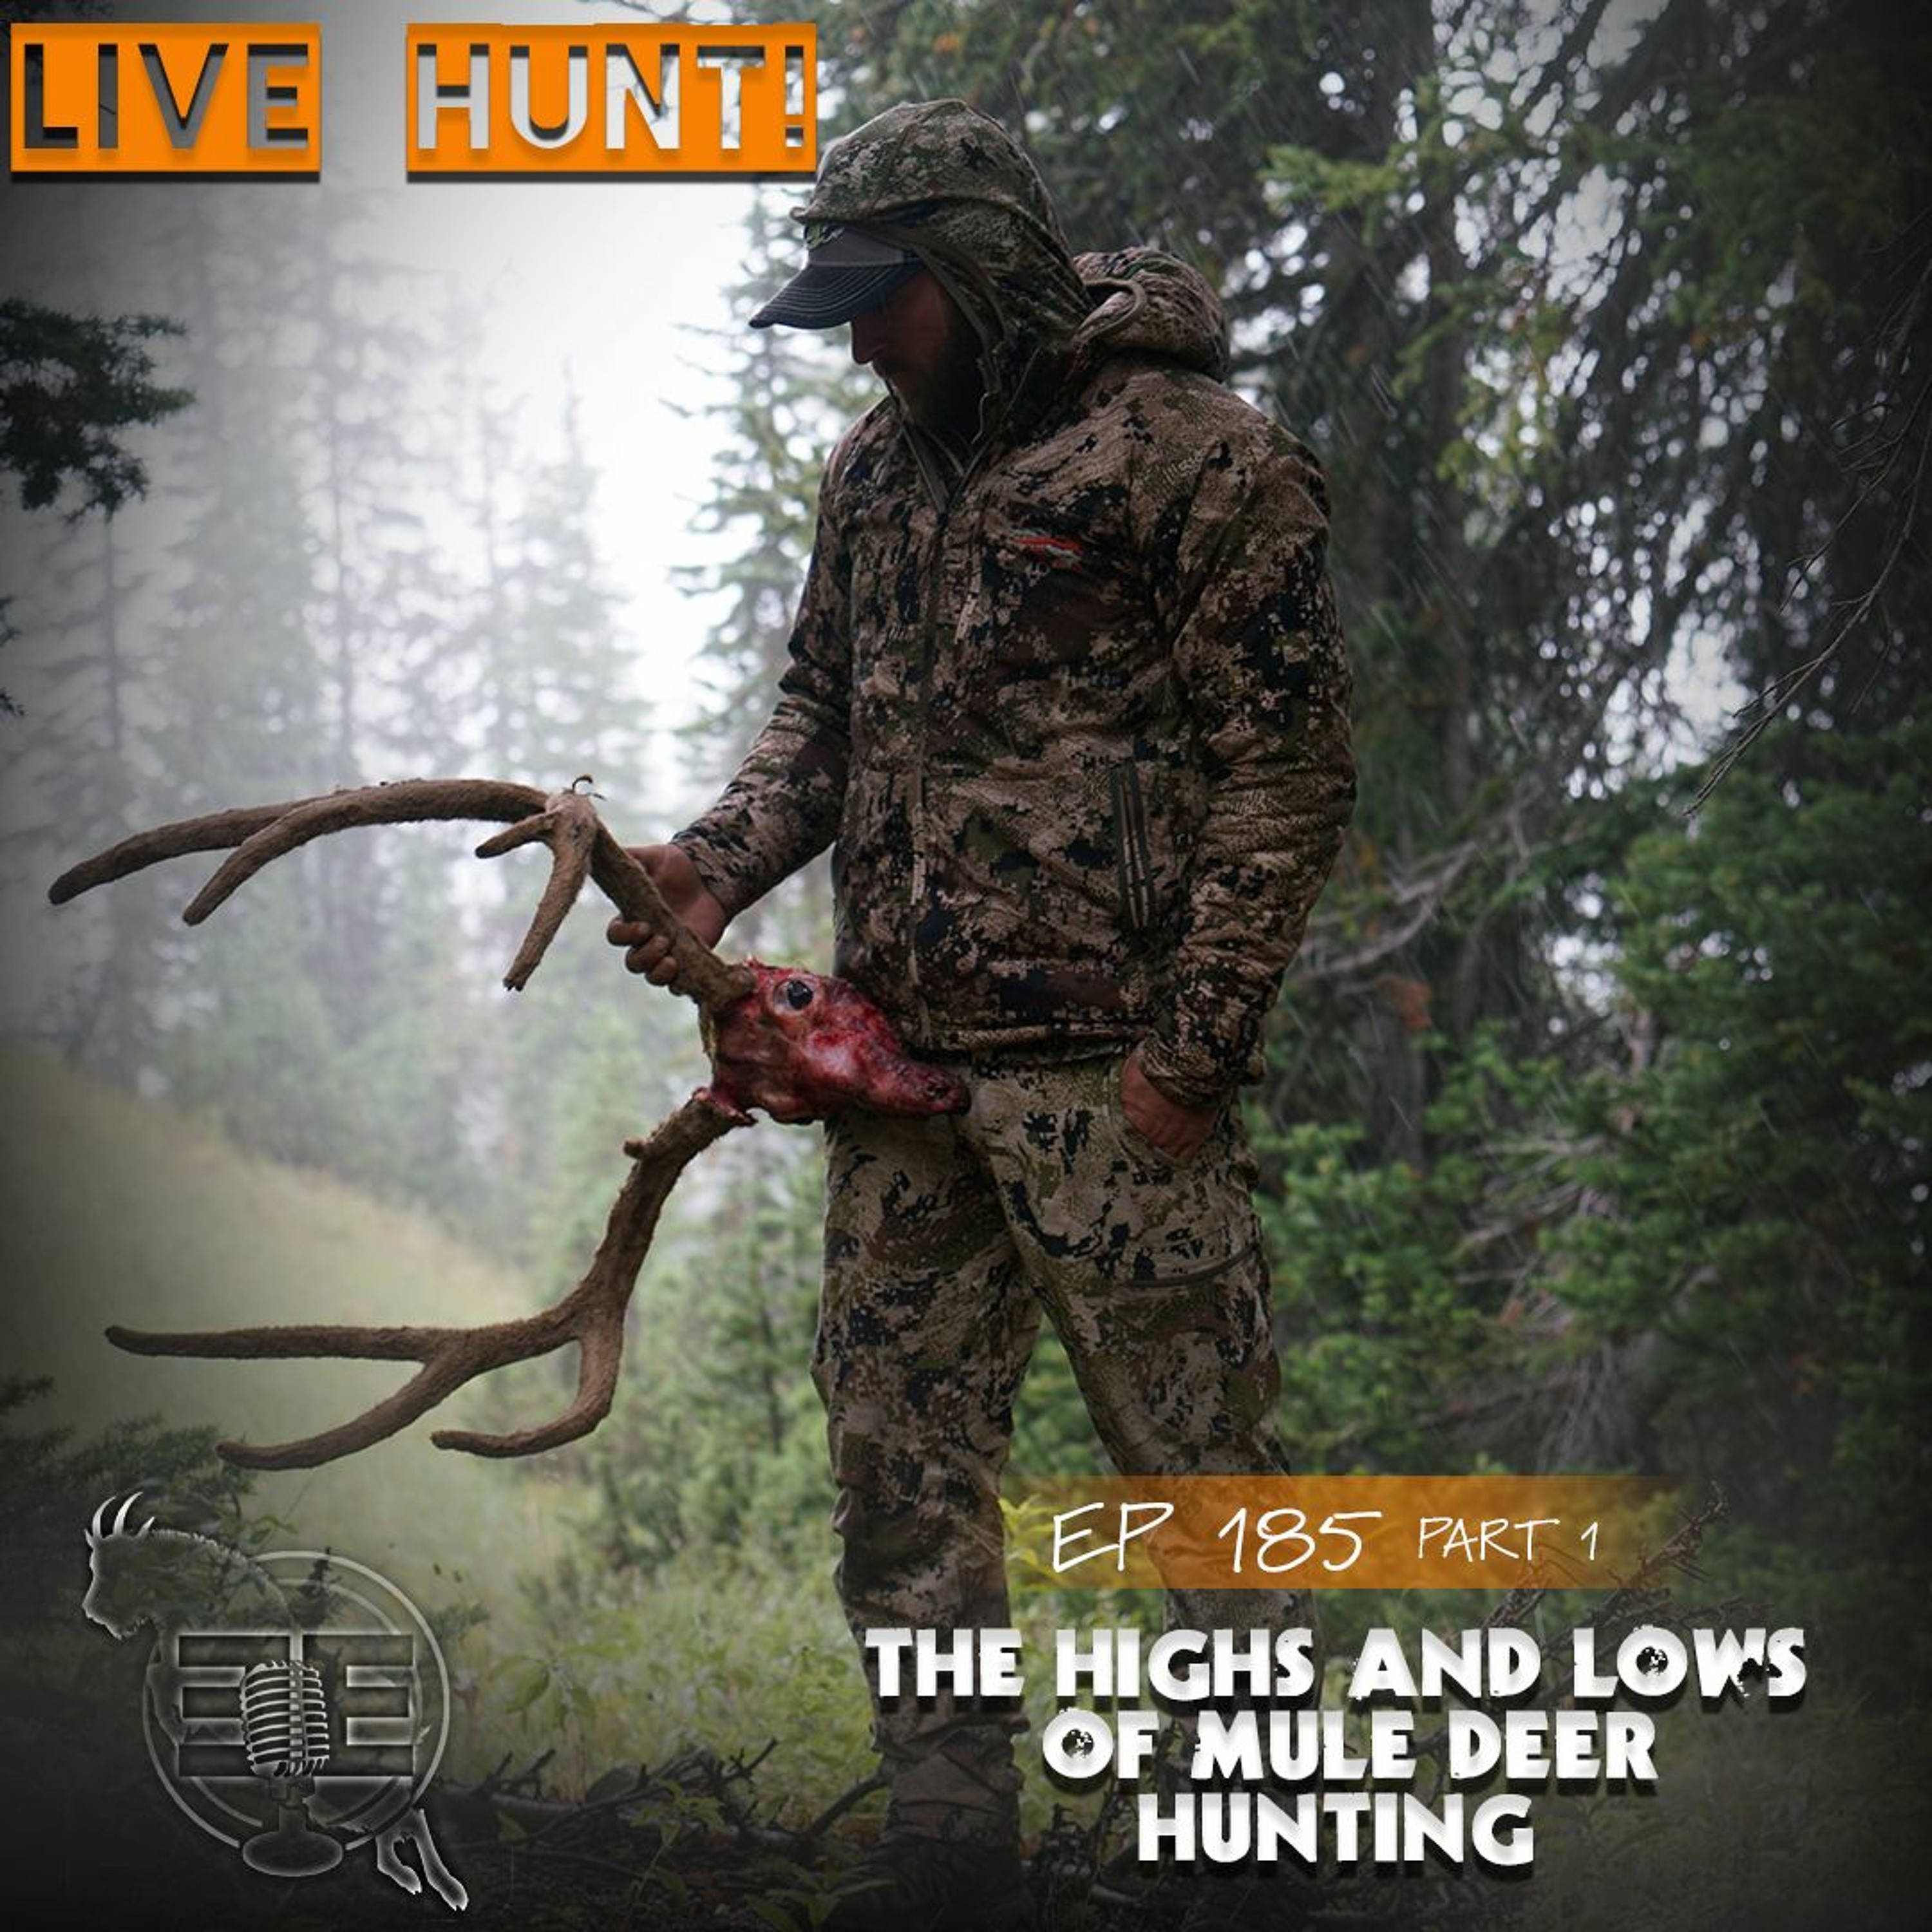 Episode 185: Live Hunt! The Highs and Lows of Mule Deer Hunting Part 1